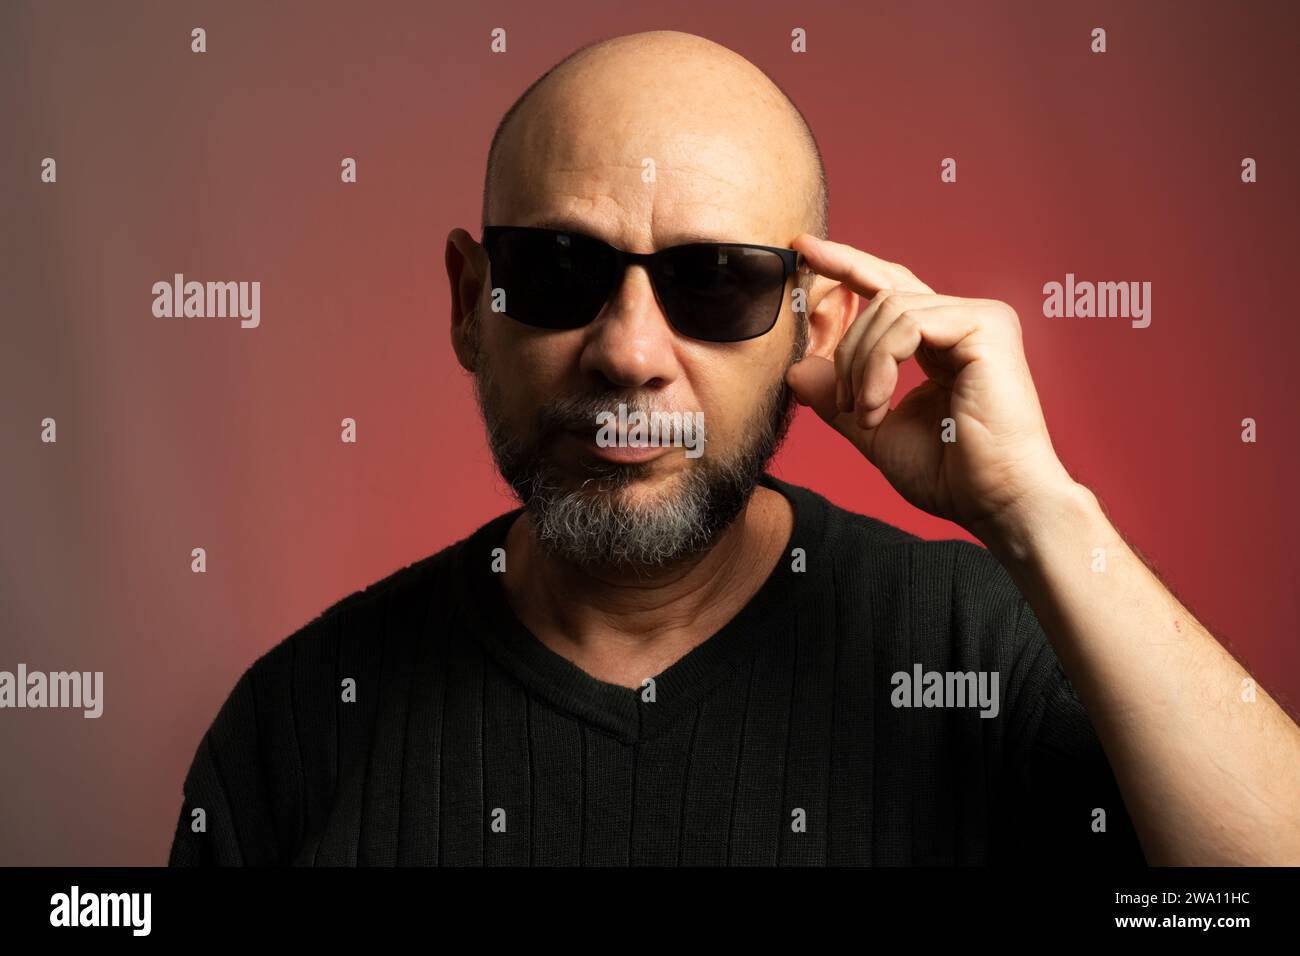 White, bald man, wearing sunglasses, confident and serious looking towards the camera. Isolated on red background. Stock Photo